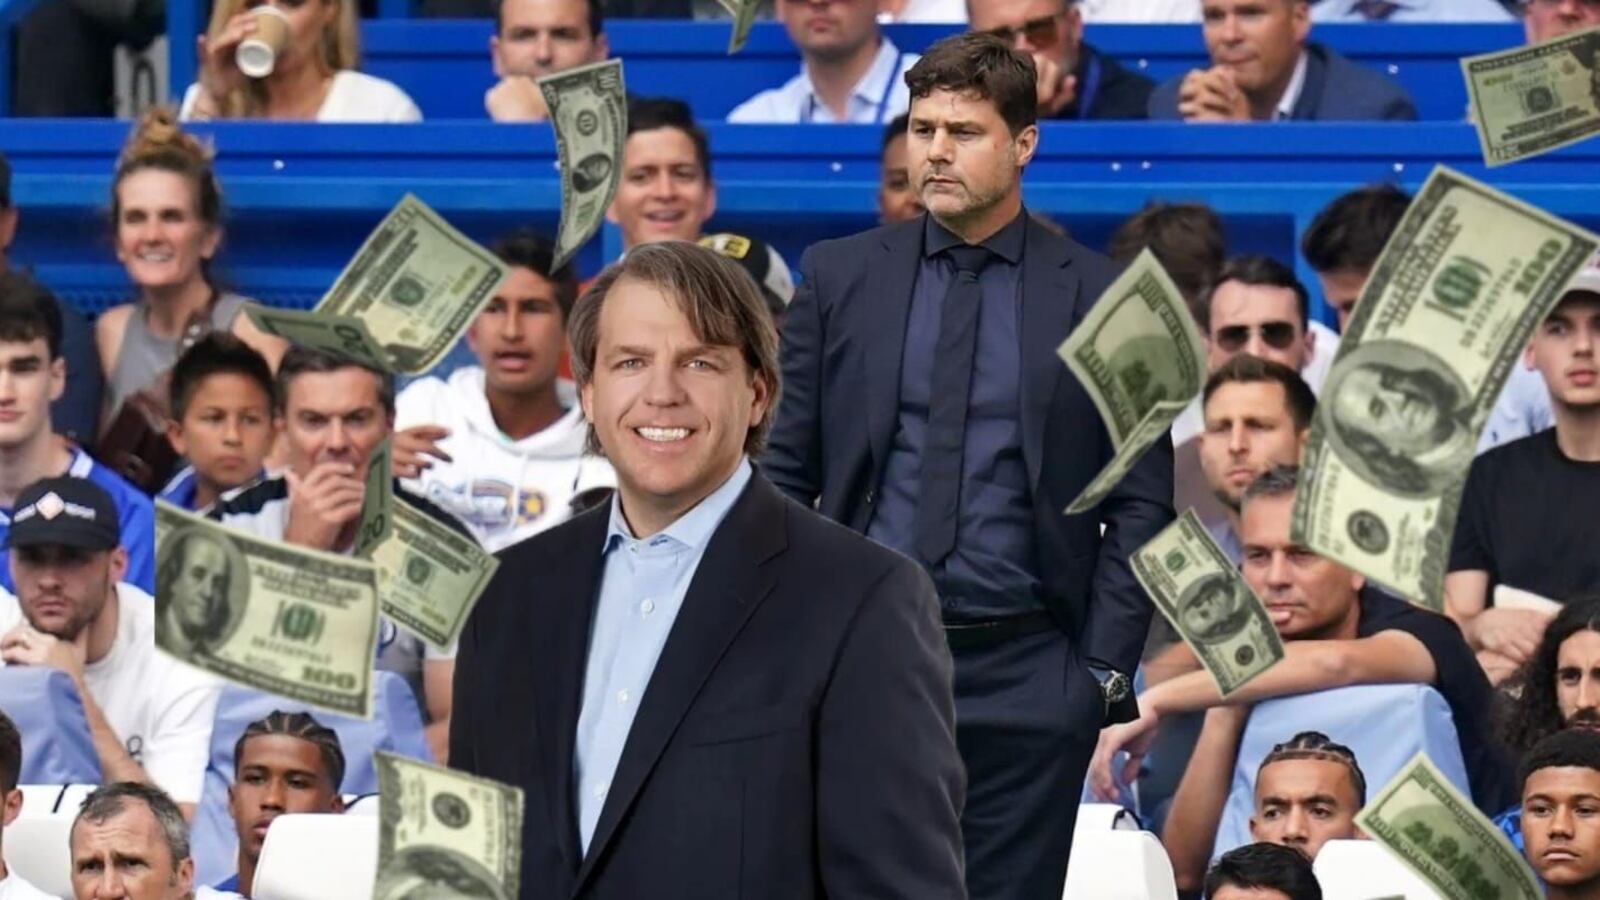 After spending more than 1.1 billion dollars, Chelsea's decision in the market